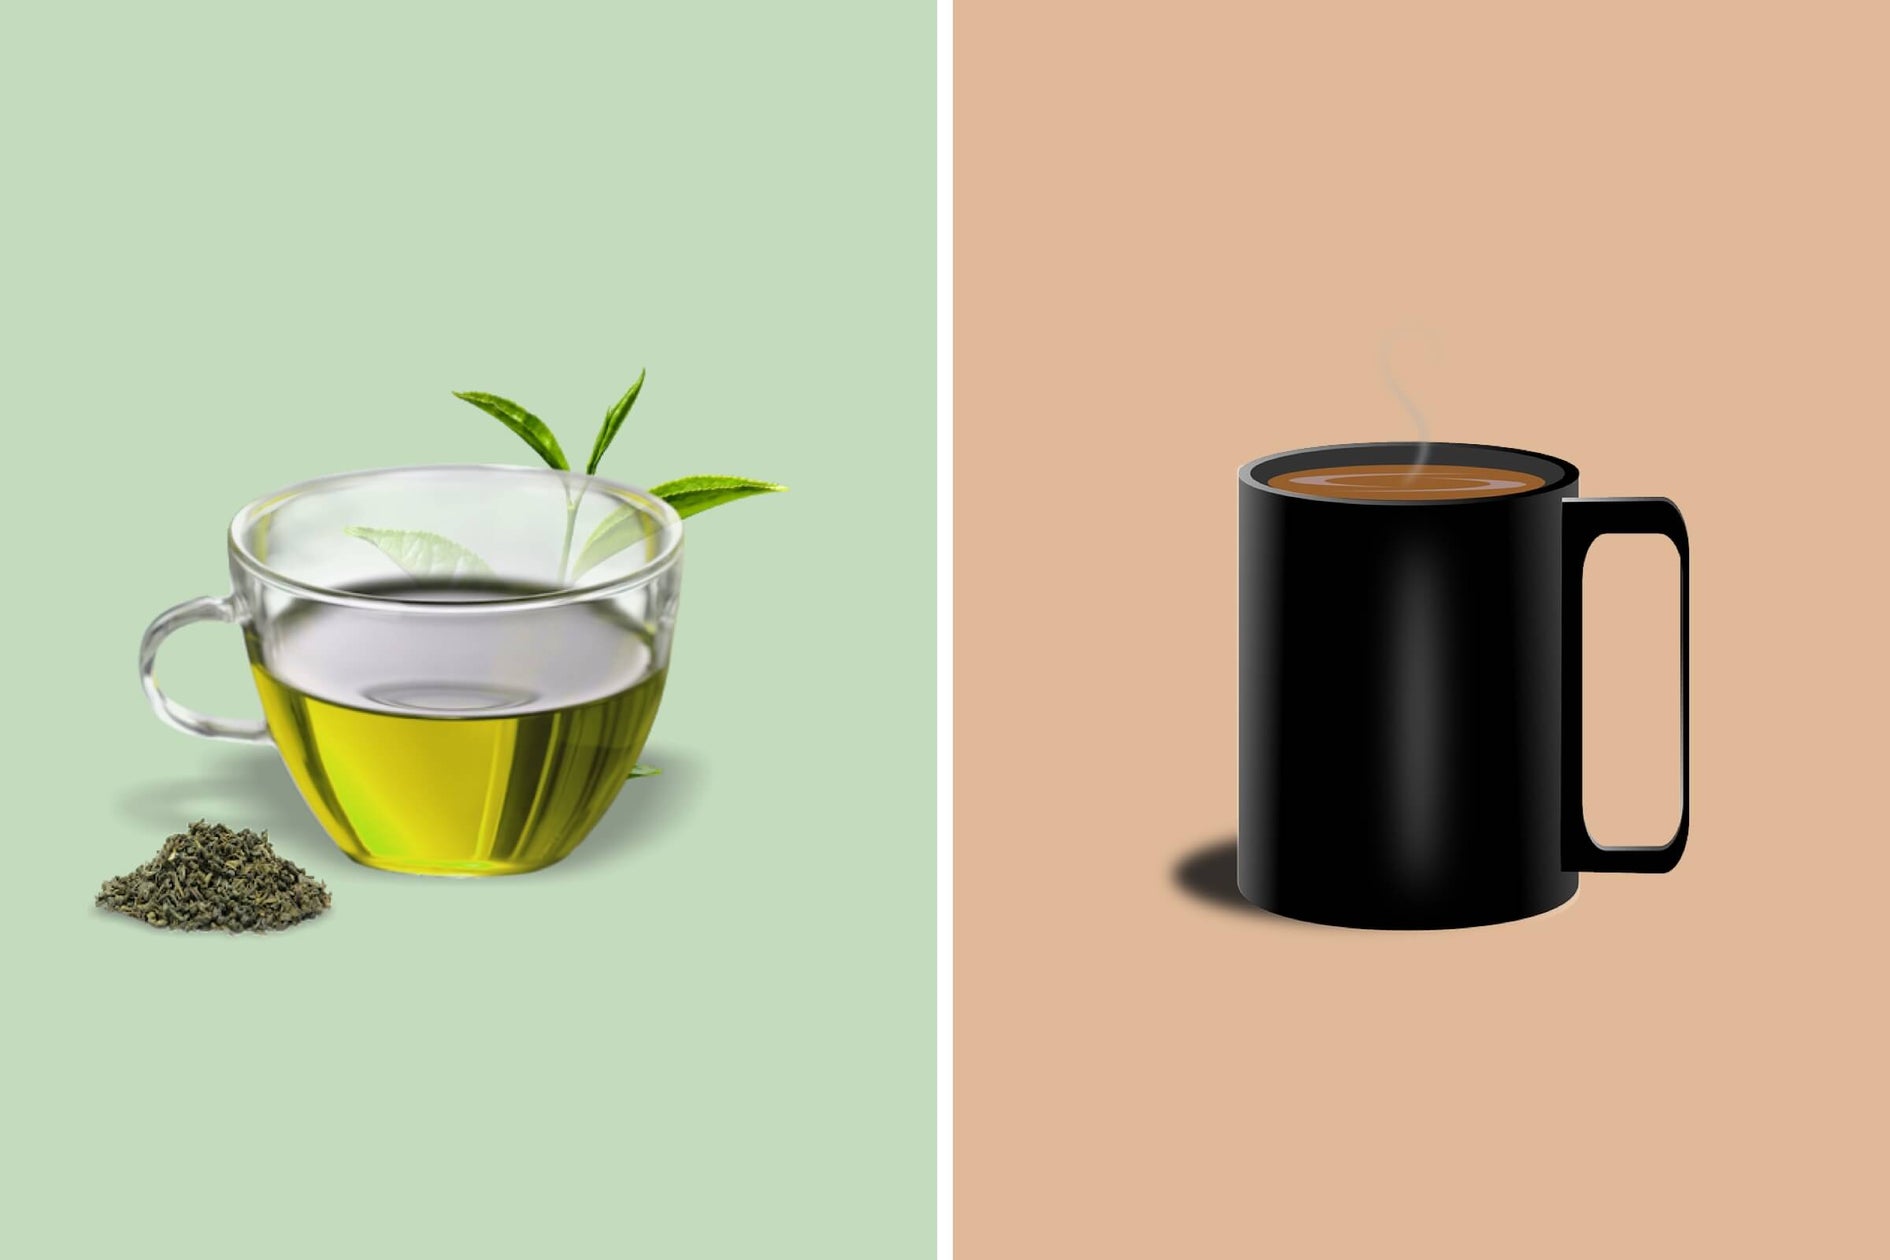 How Much Caffeine is in Green Tea Compared to Coffee?